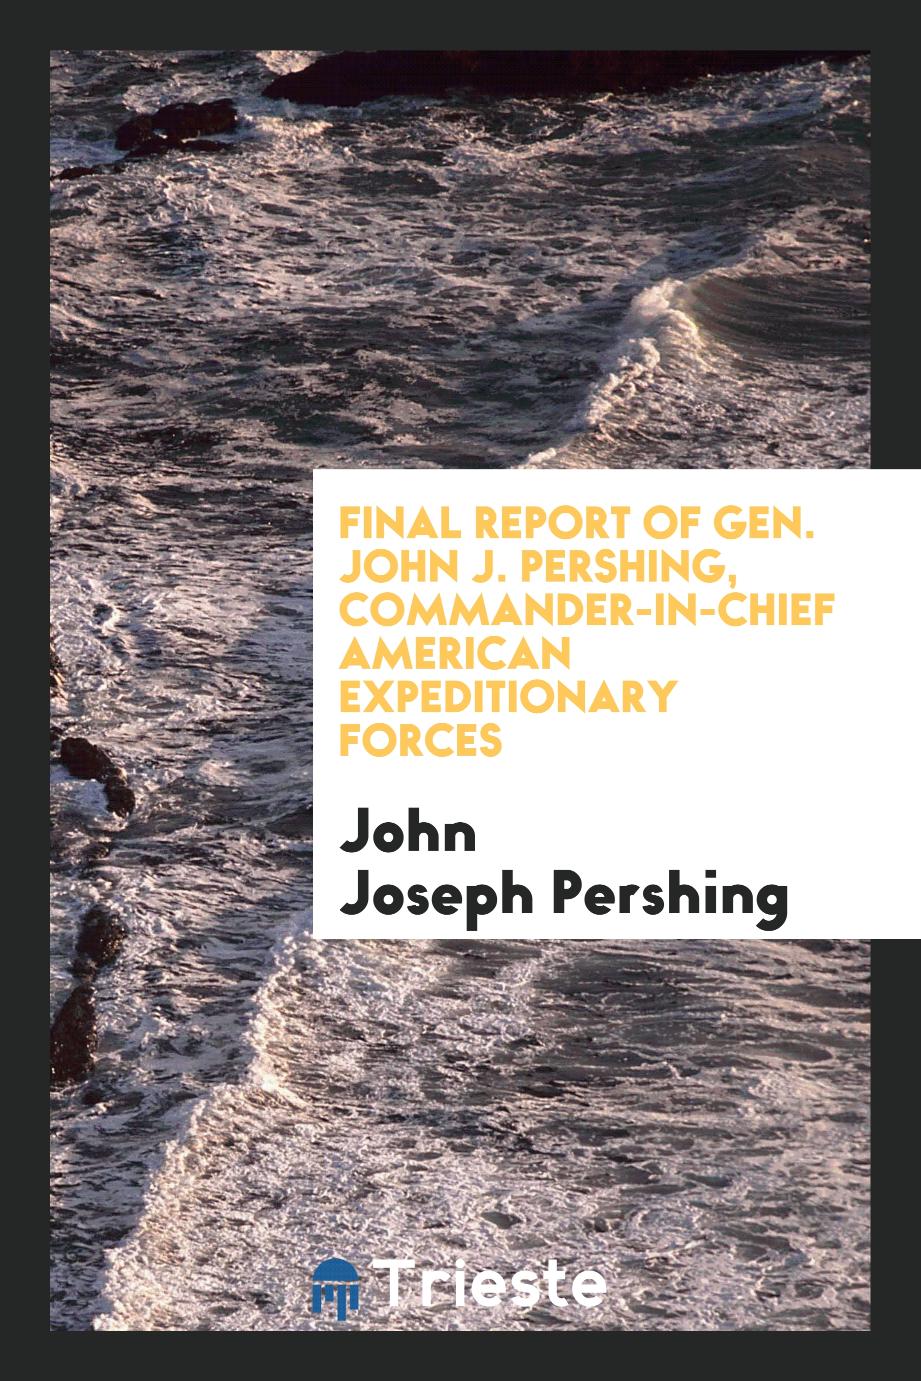 Final Report of Gen. John J. Pershing, Commander-in-Chief American Expeditionary Forces